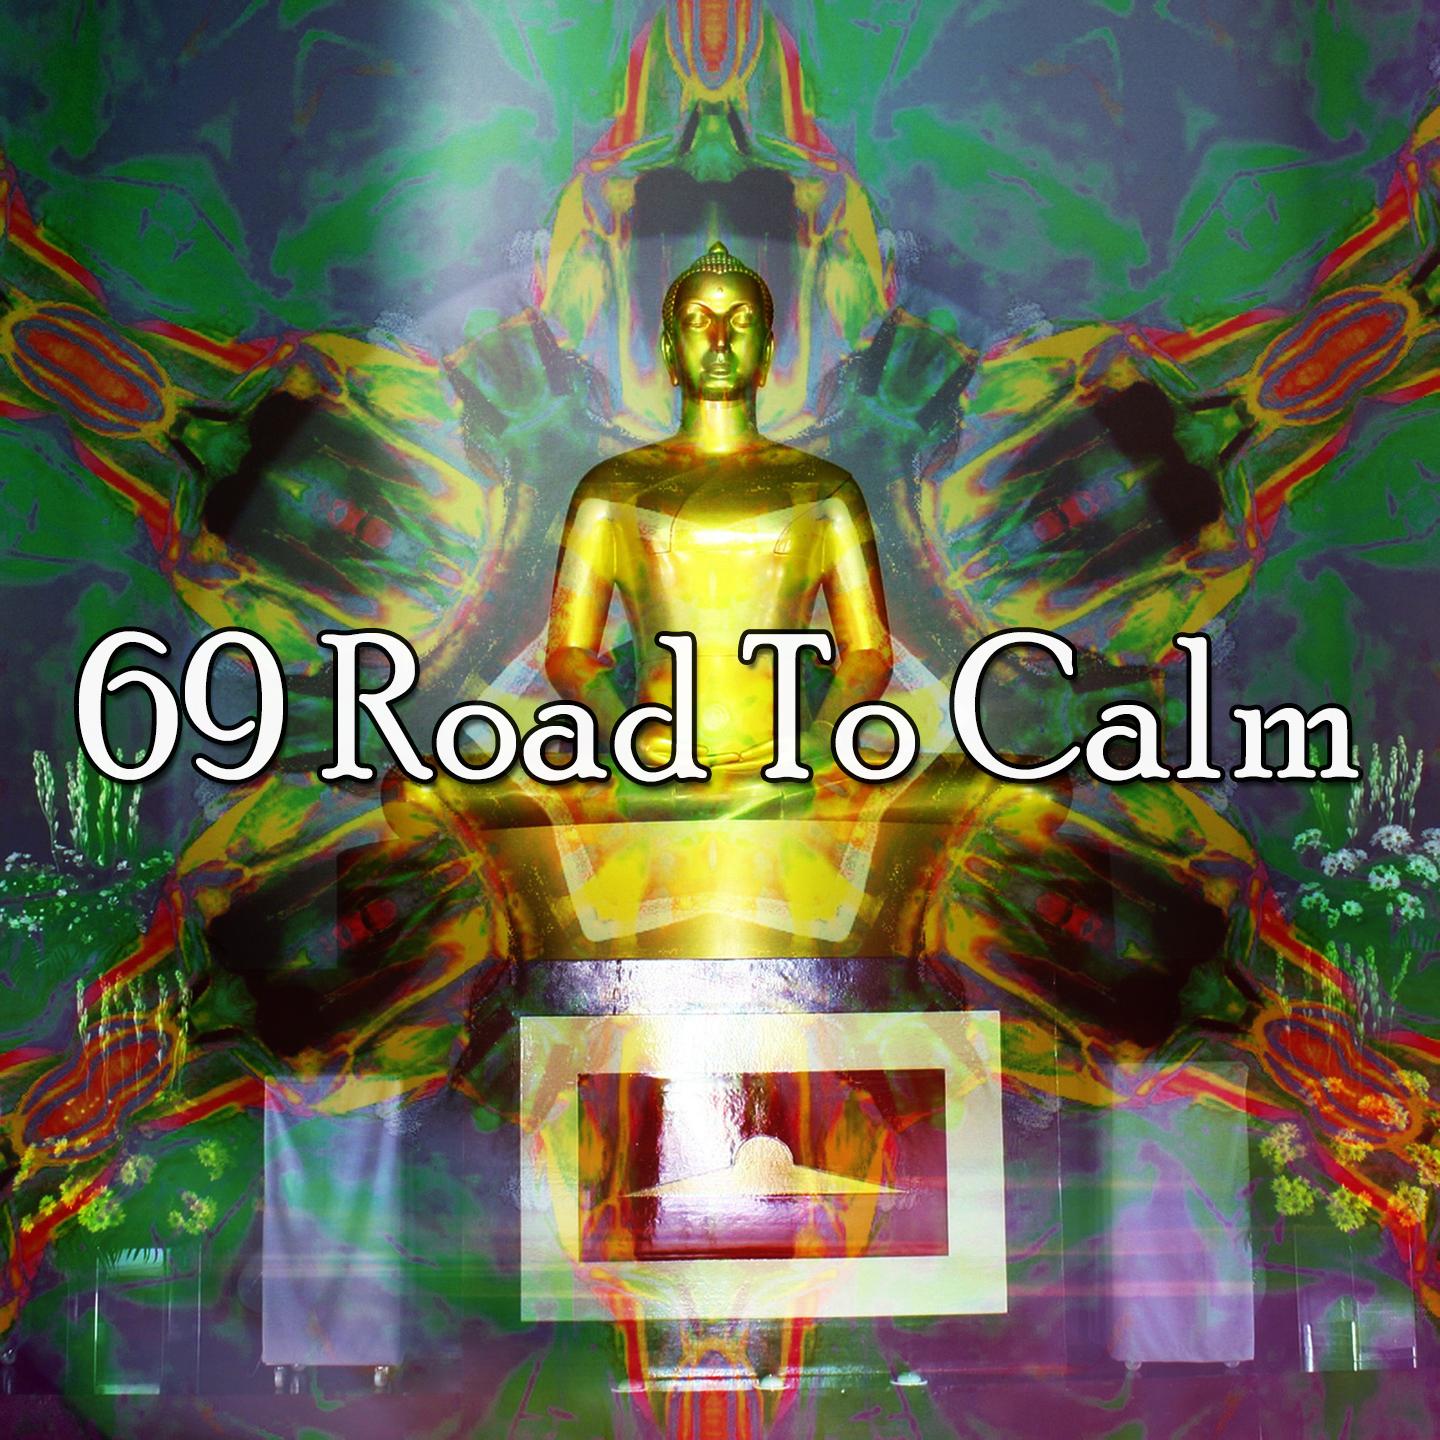 69 Road to Calm